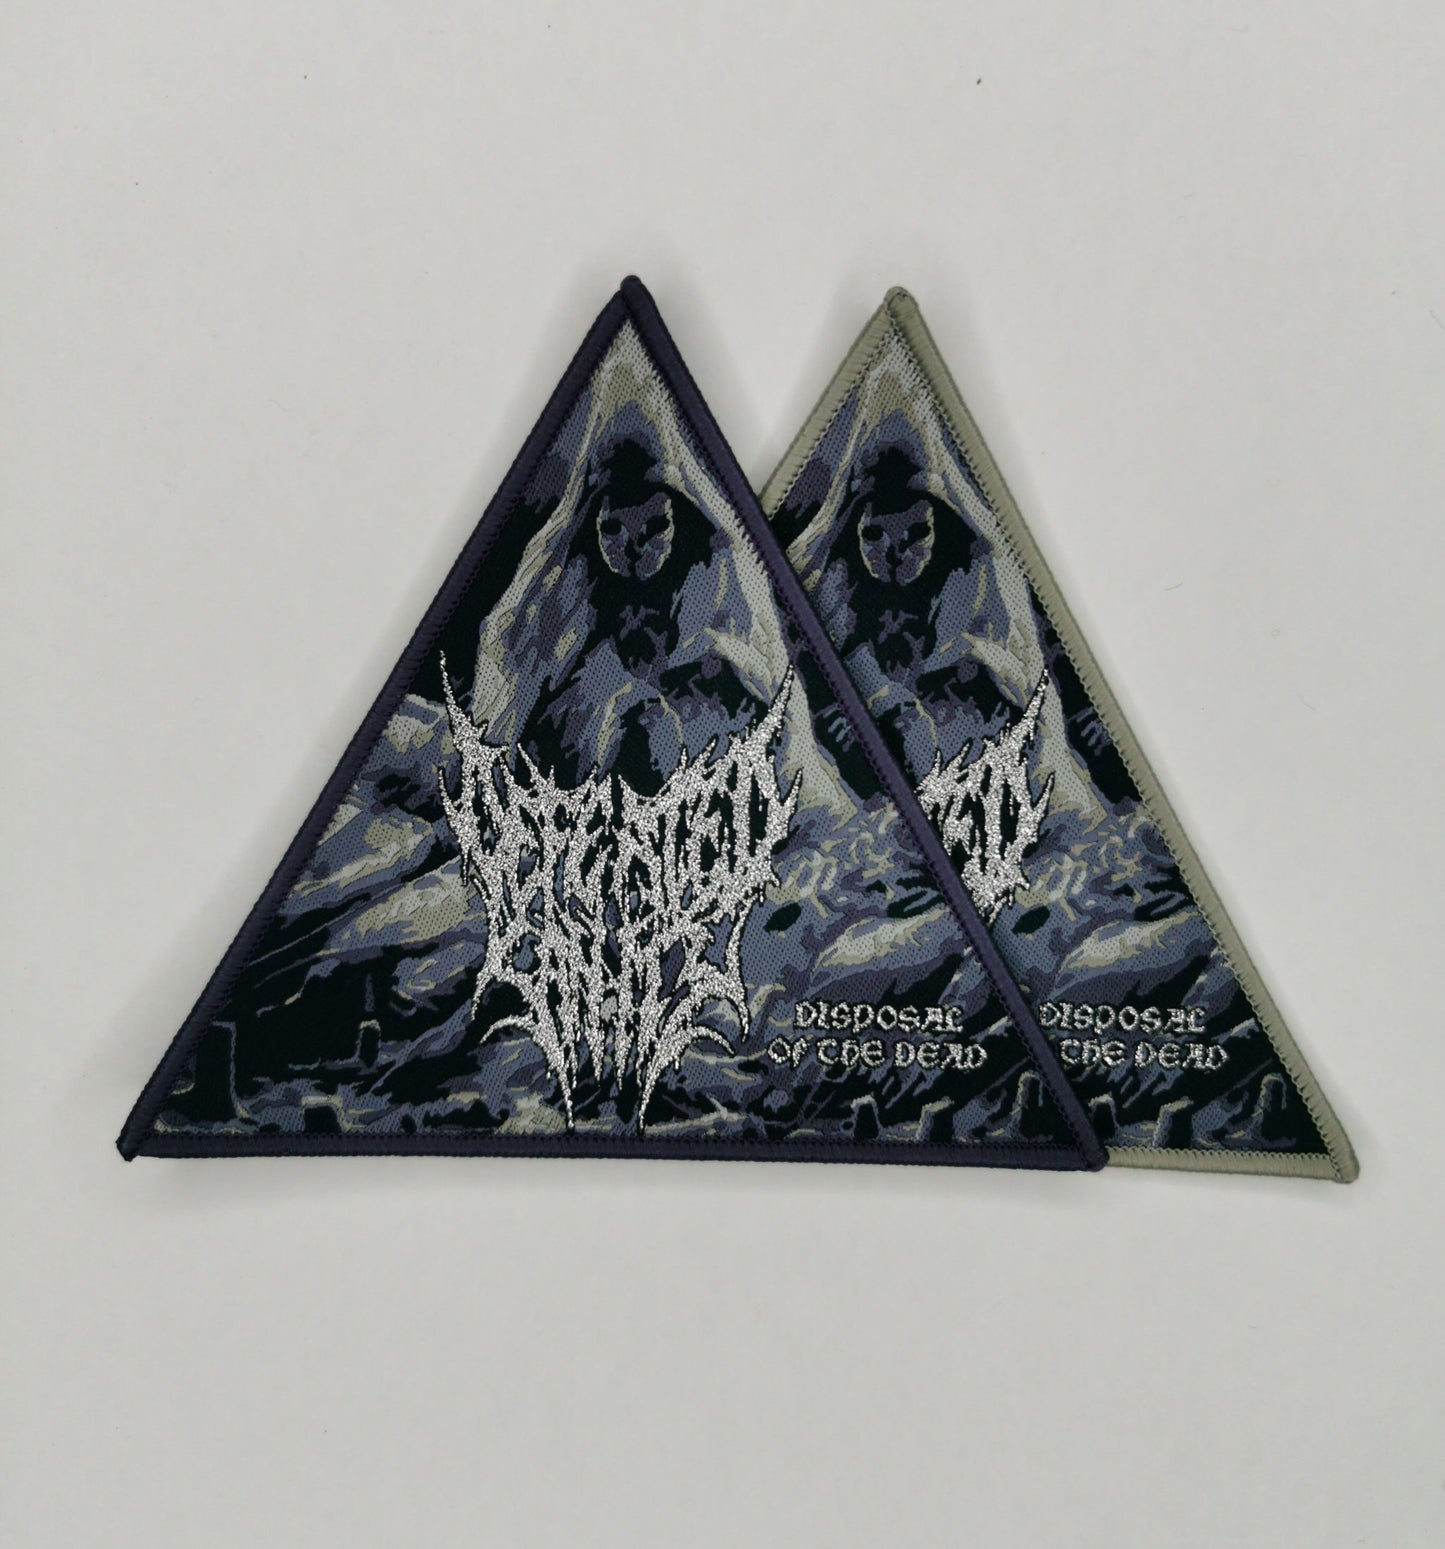 Temporal Dimensions Patches Defeated Sanity Disposal of the Dead Woven Patches